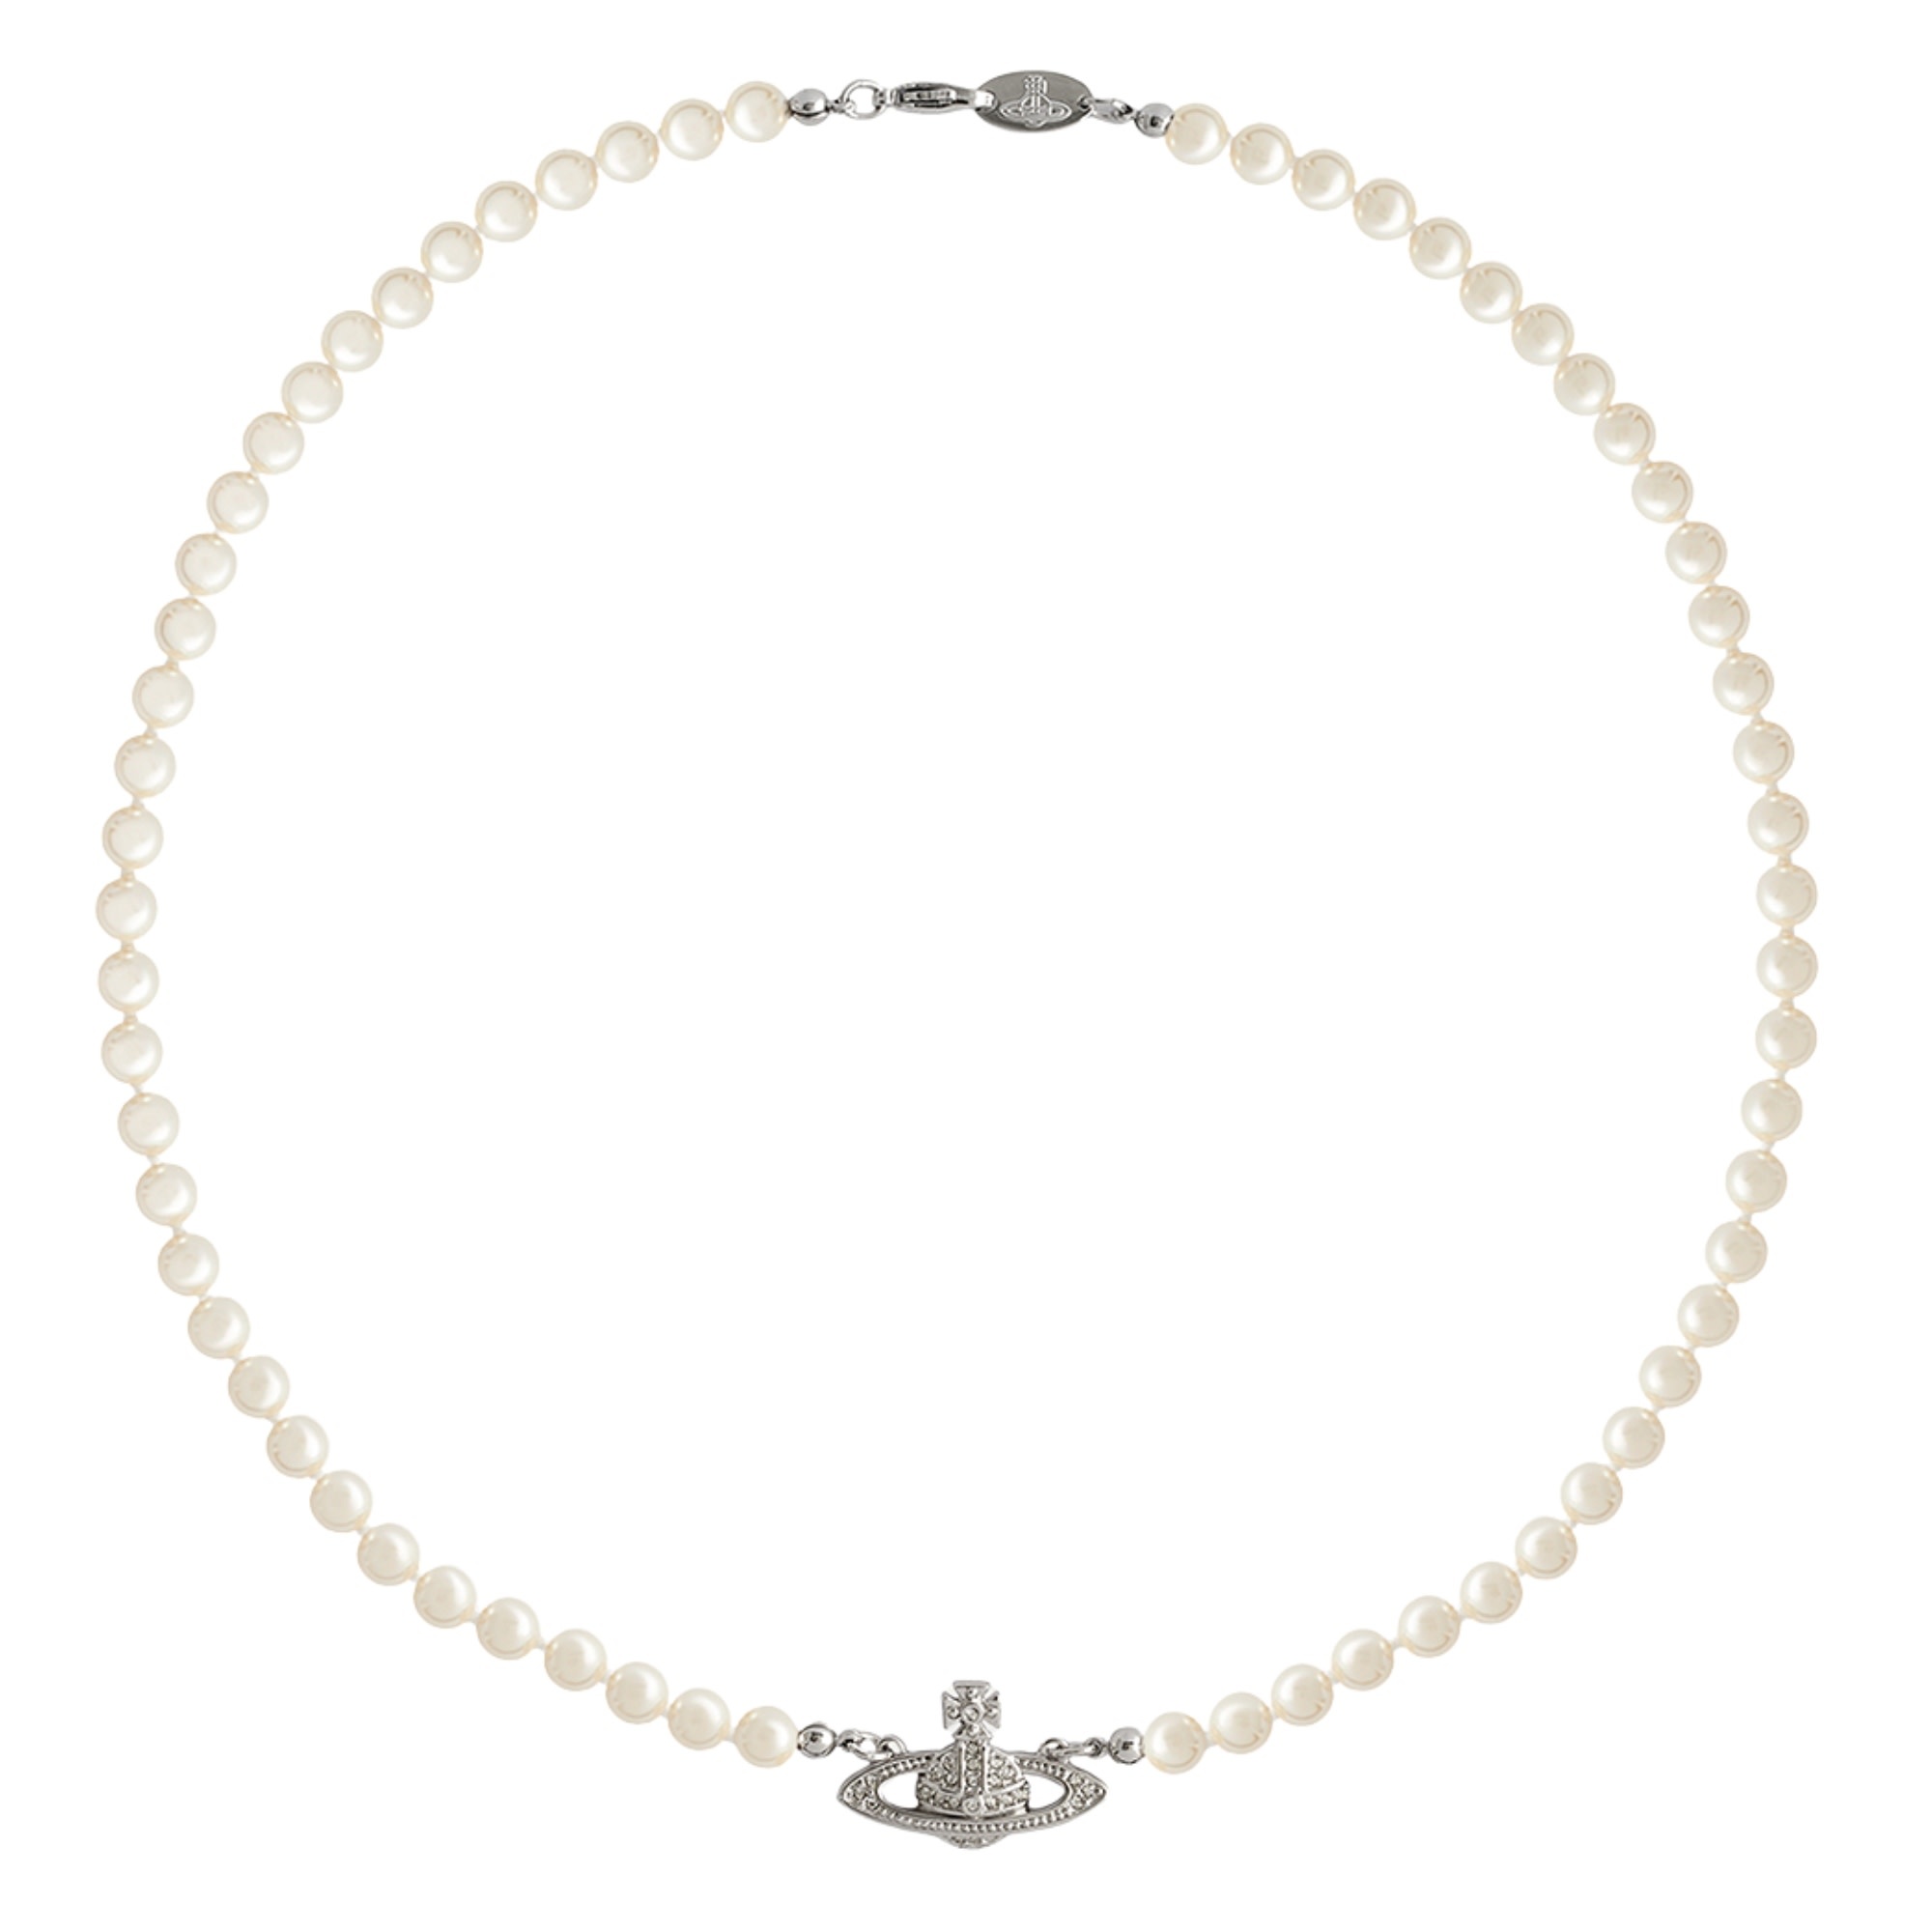 Man. Mini Bas Relief Pearl Necklace in PLATINUM-CREAM-Pearl-CRYSTAL |  Vivienne Westwood® | Pretty necklaces, Mens jewelry necklace, Swarovski  pearls